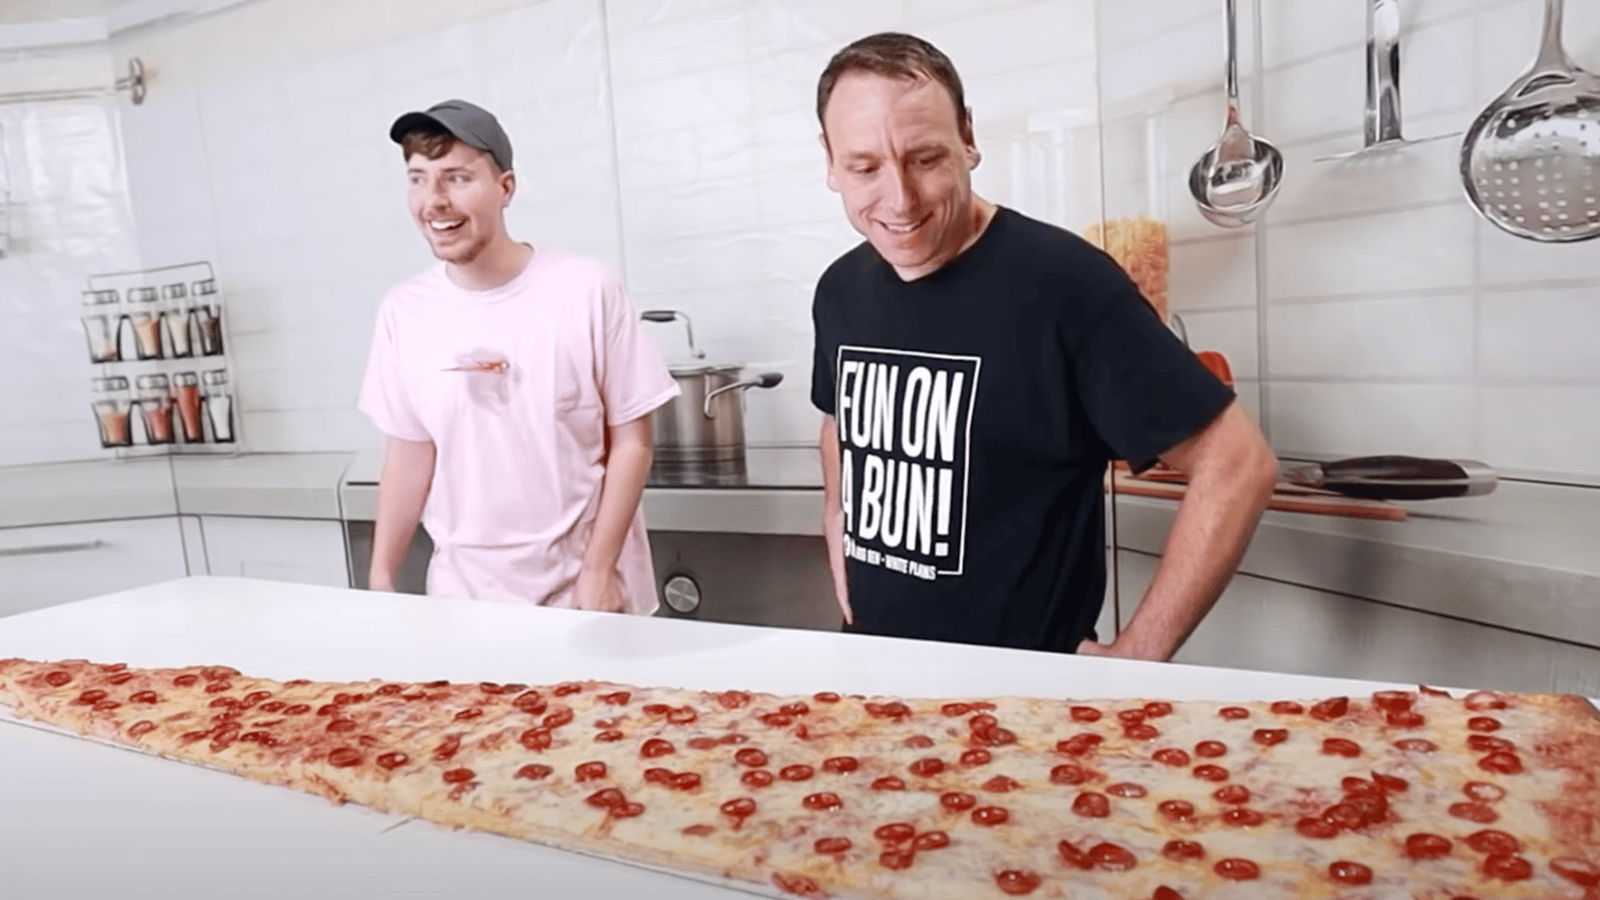 Joey Chestnut and Mr Beast, world's largest pizza slice